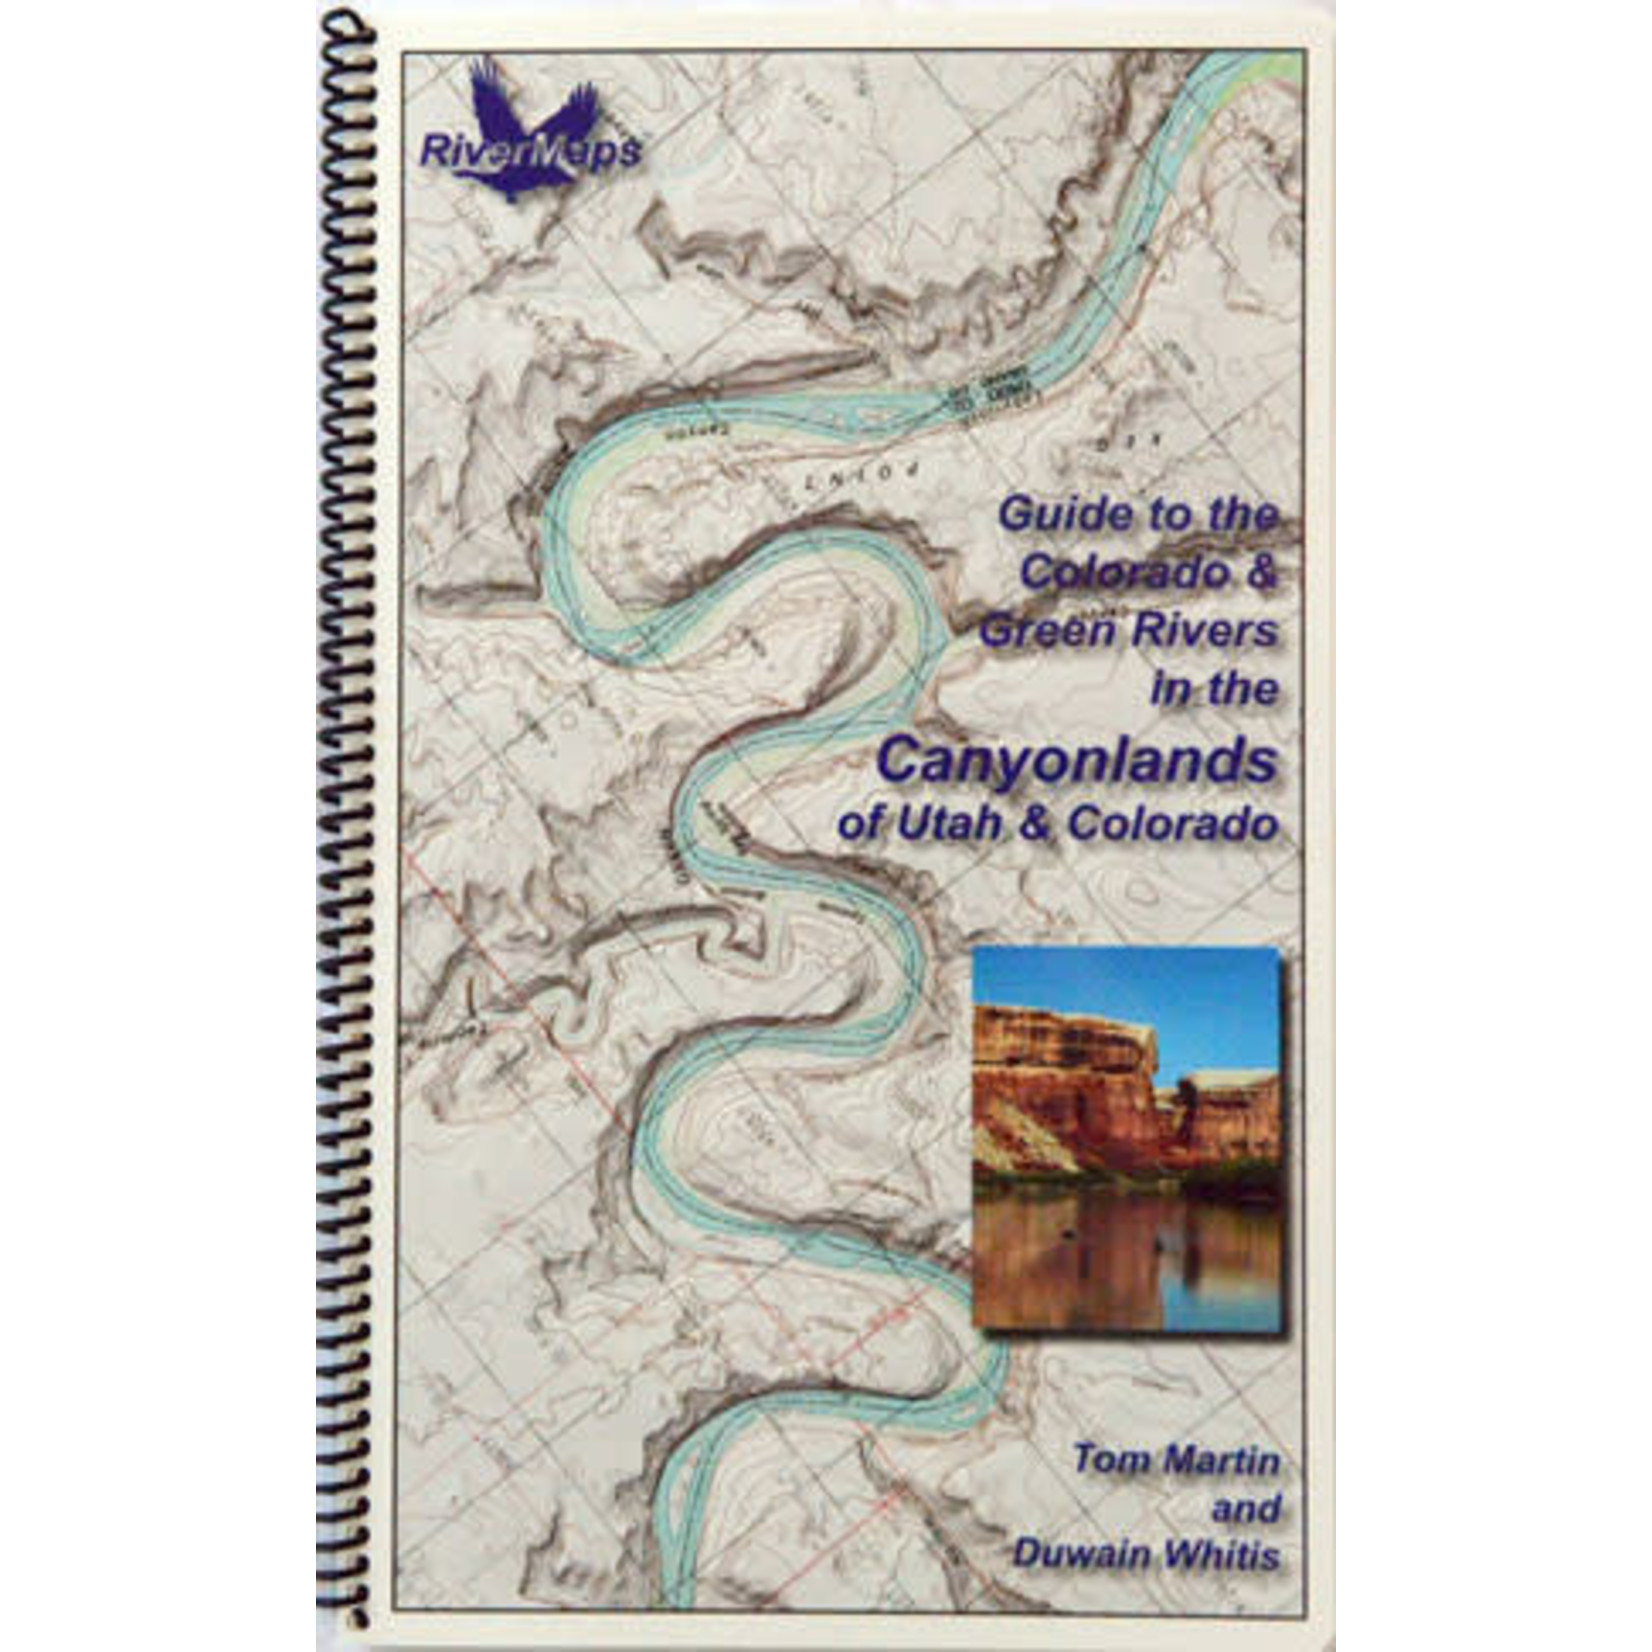 Rivermaps RiverMaps Colorado & Green Rivers in the Canyonlands Guide Book